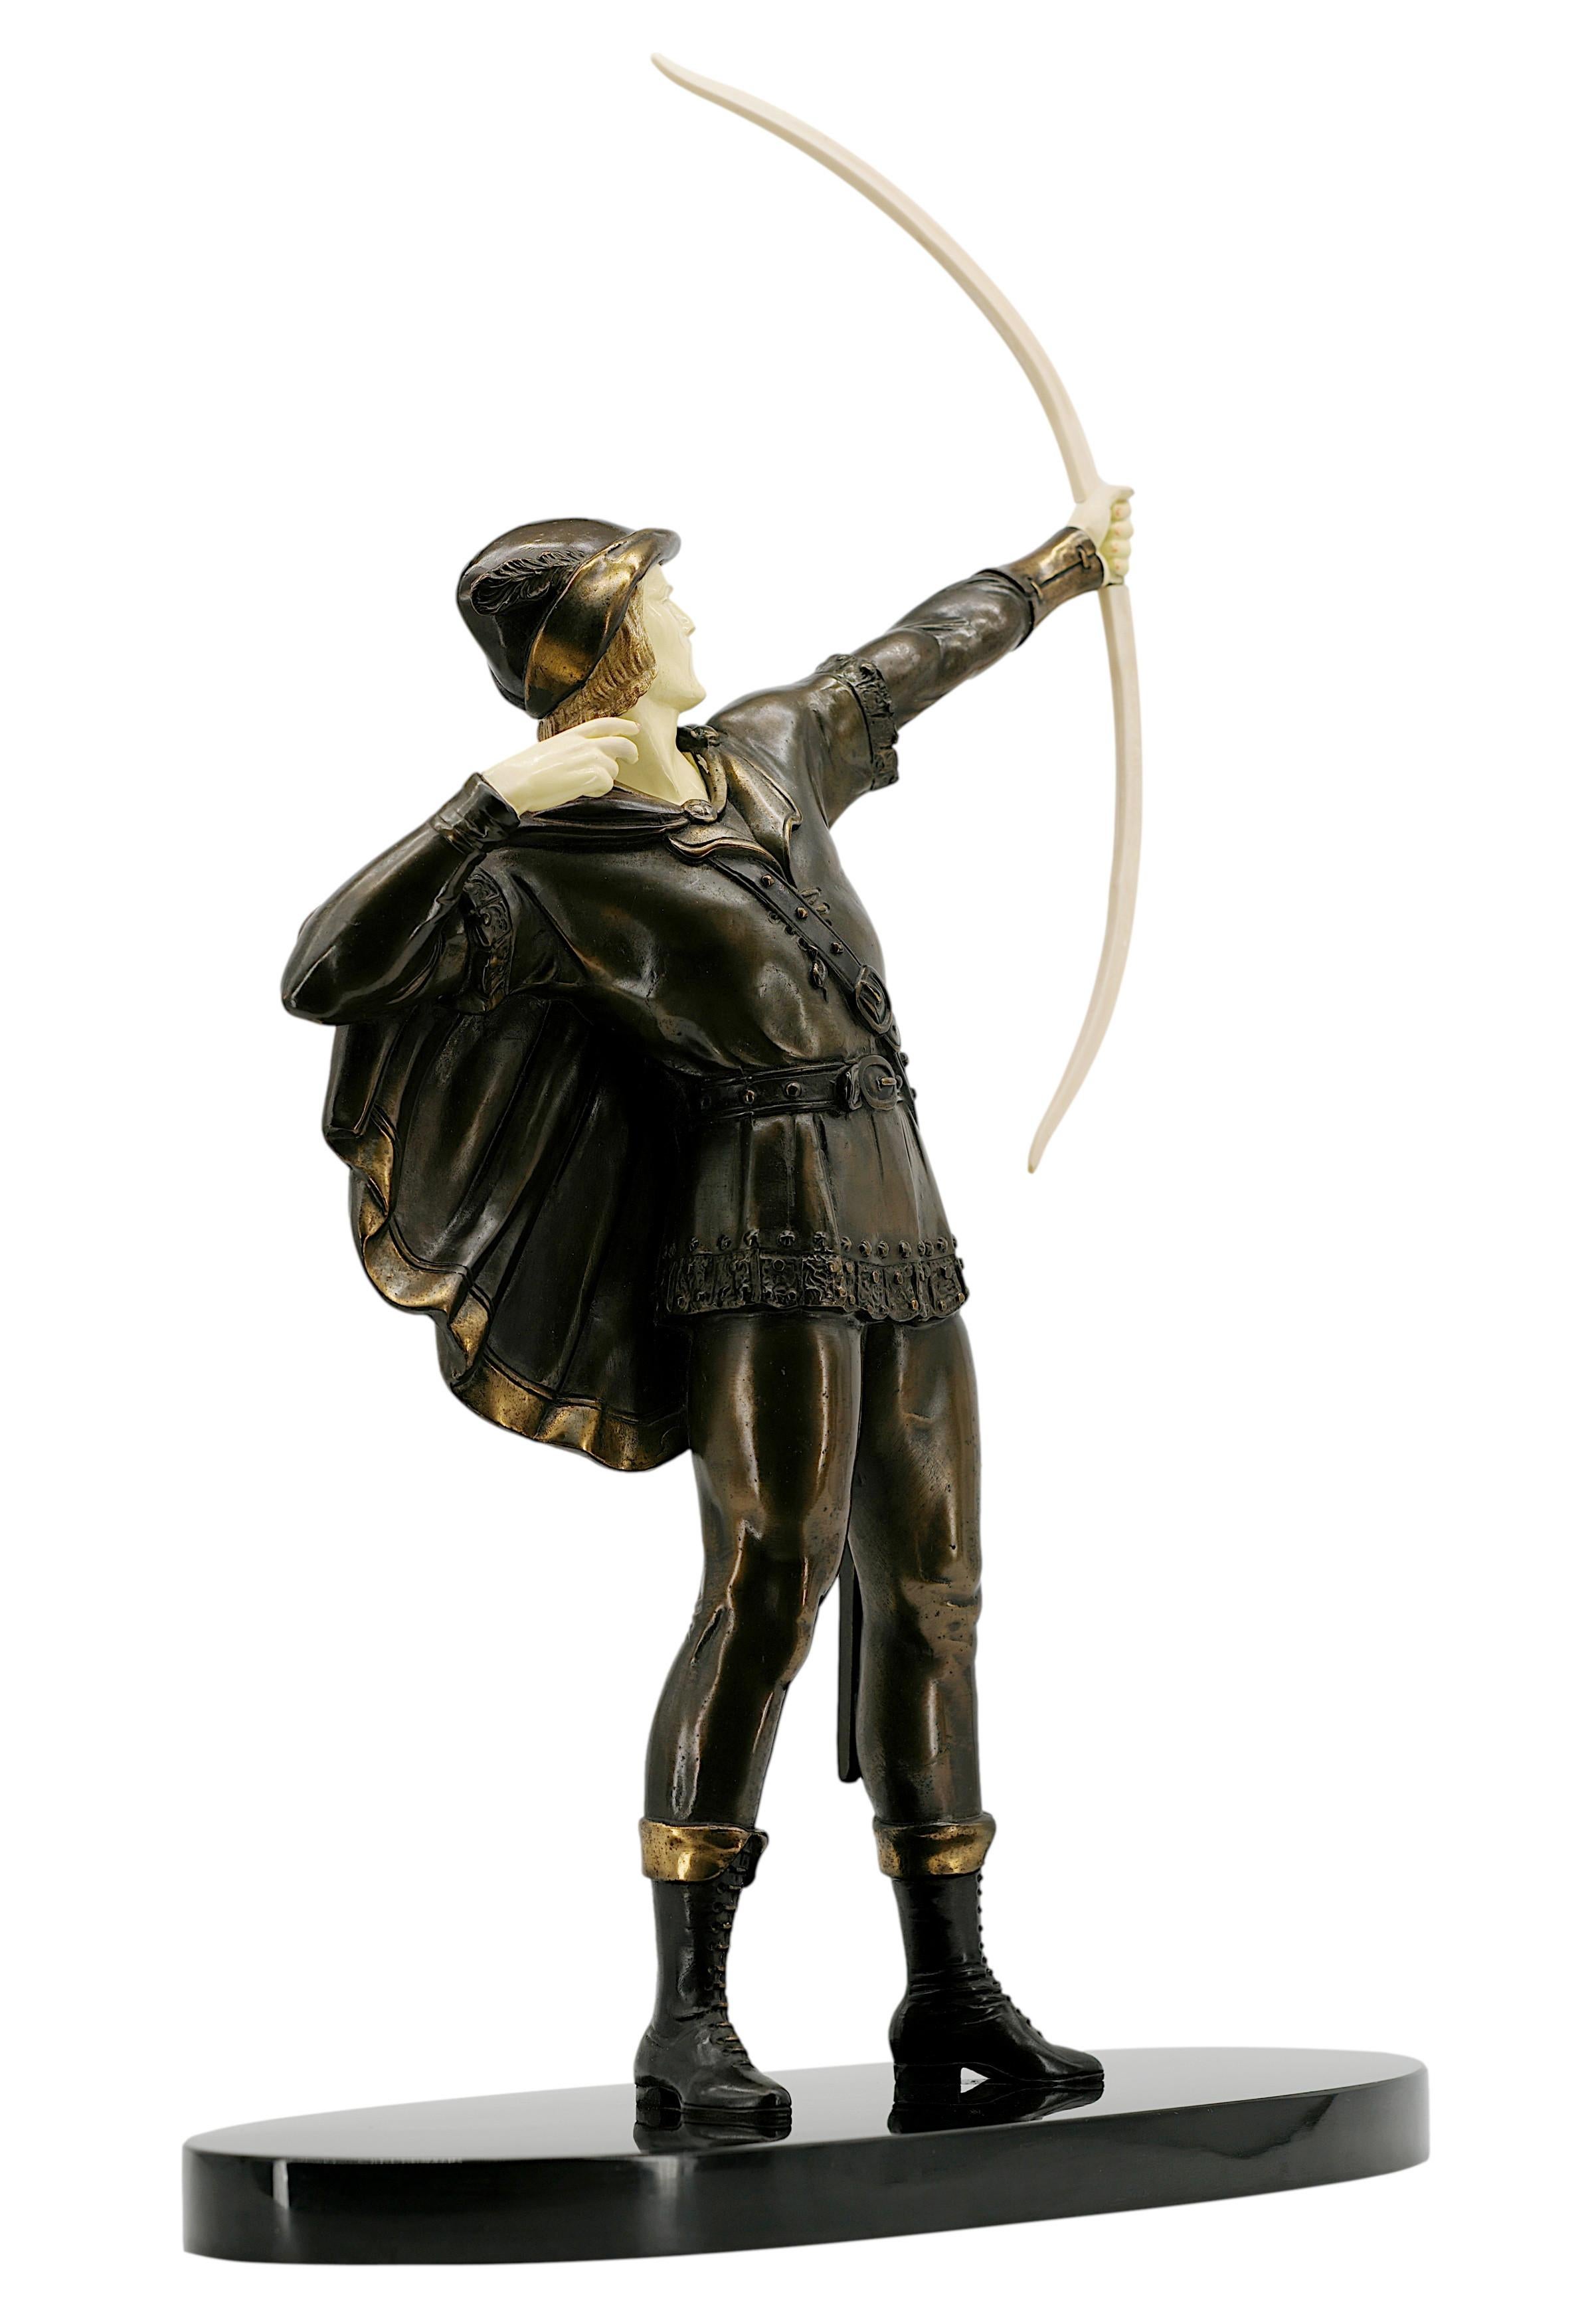 Spelter French Art Deco Robin Hood Sculpture, 1930s For Sale